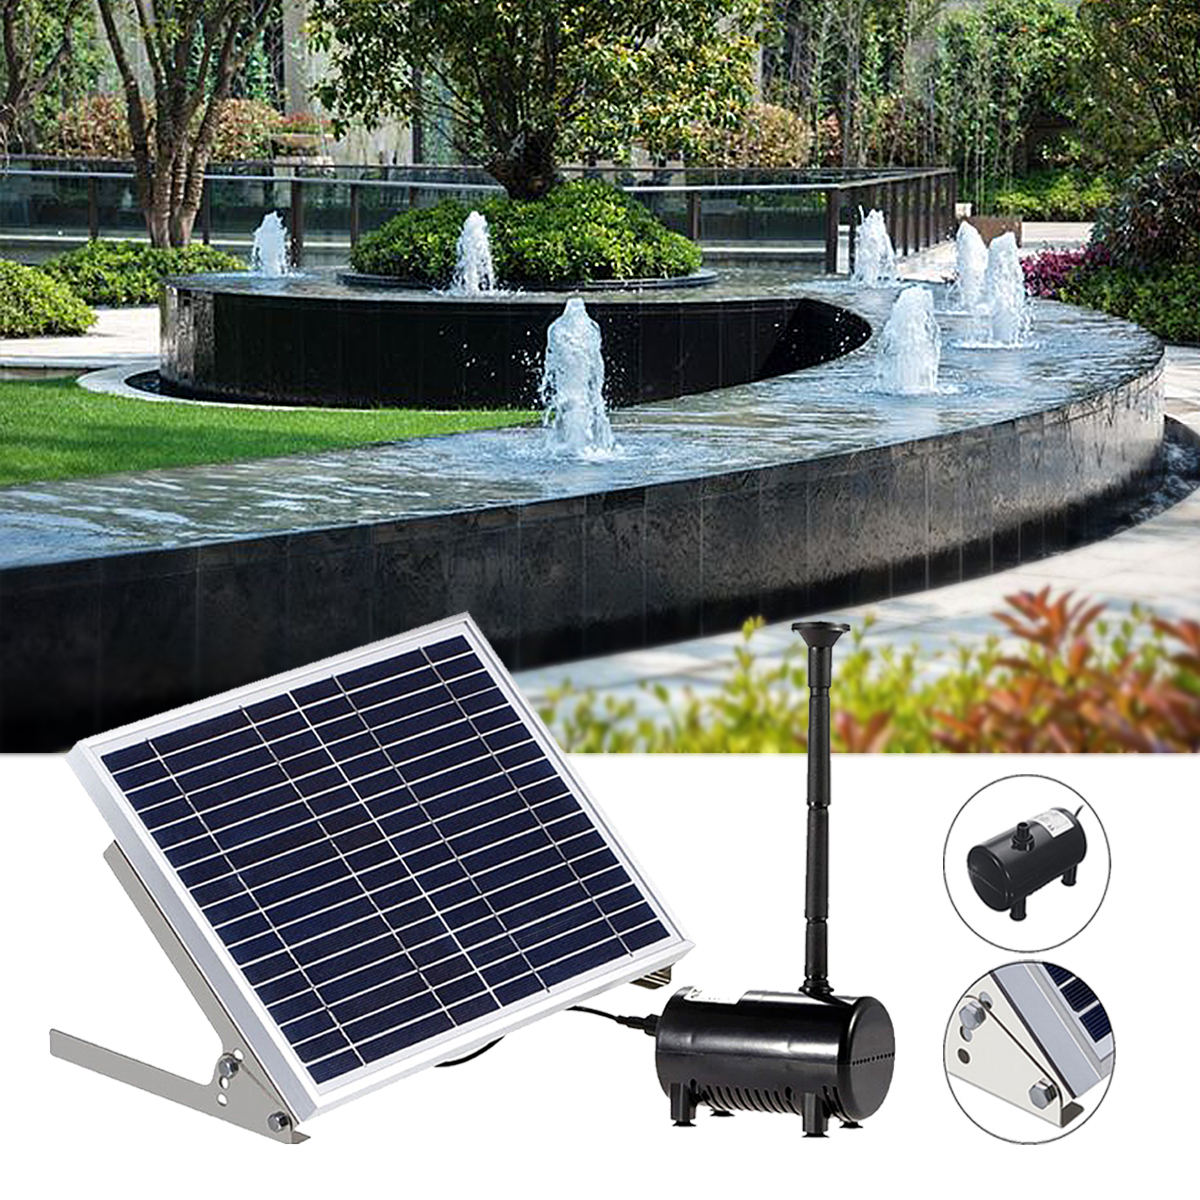 Solar Pump Panel Kit,Submersible Solar Water Pump Kit for Fountain Pool Water Gardens 3W 